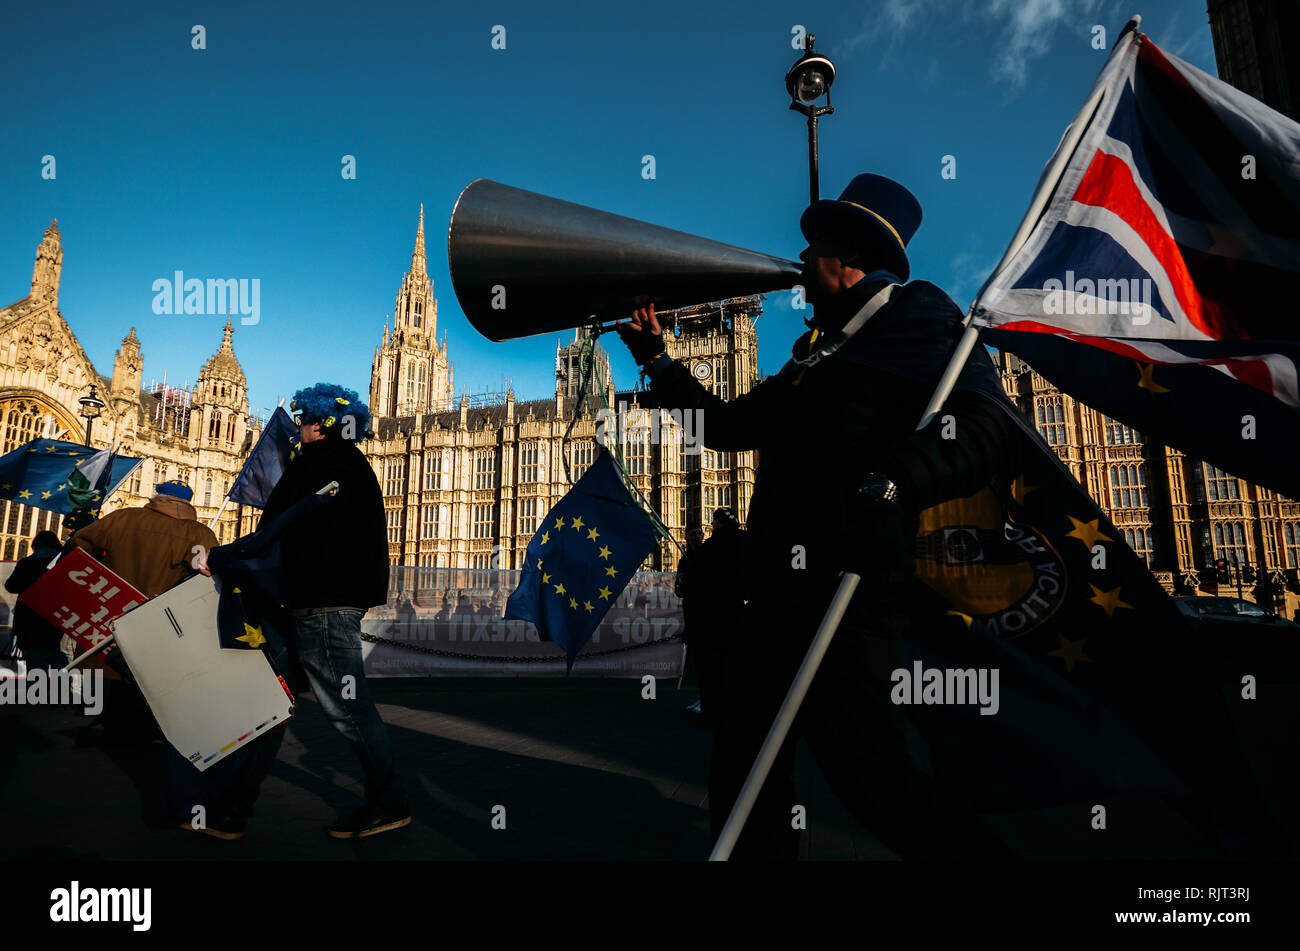 London, UK - Feb 7, 2019: Steve Bray, founder of Sodem (Stand of Defiance European Movement), protesting against Brexit outside the Houses of Parliament, London Credit: Alexandre Rotenberg/Alamy Live News Stock Photo